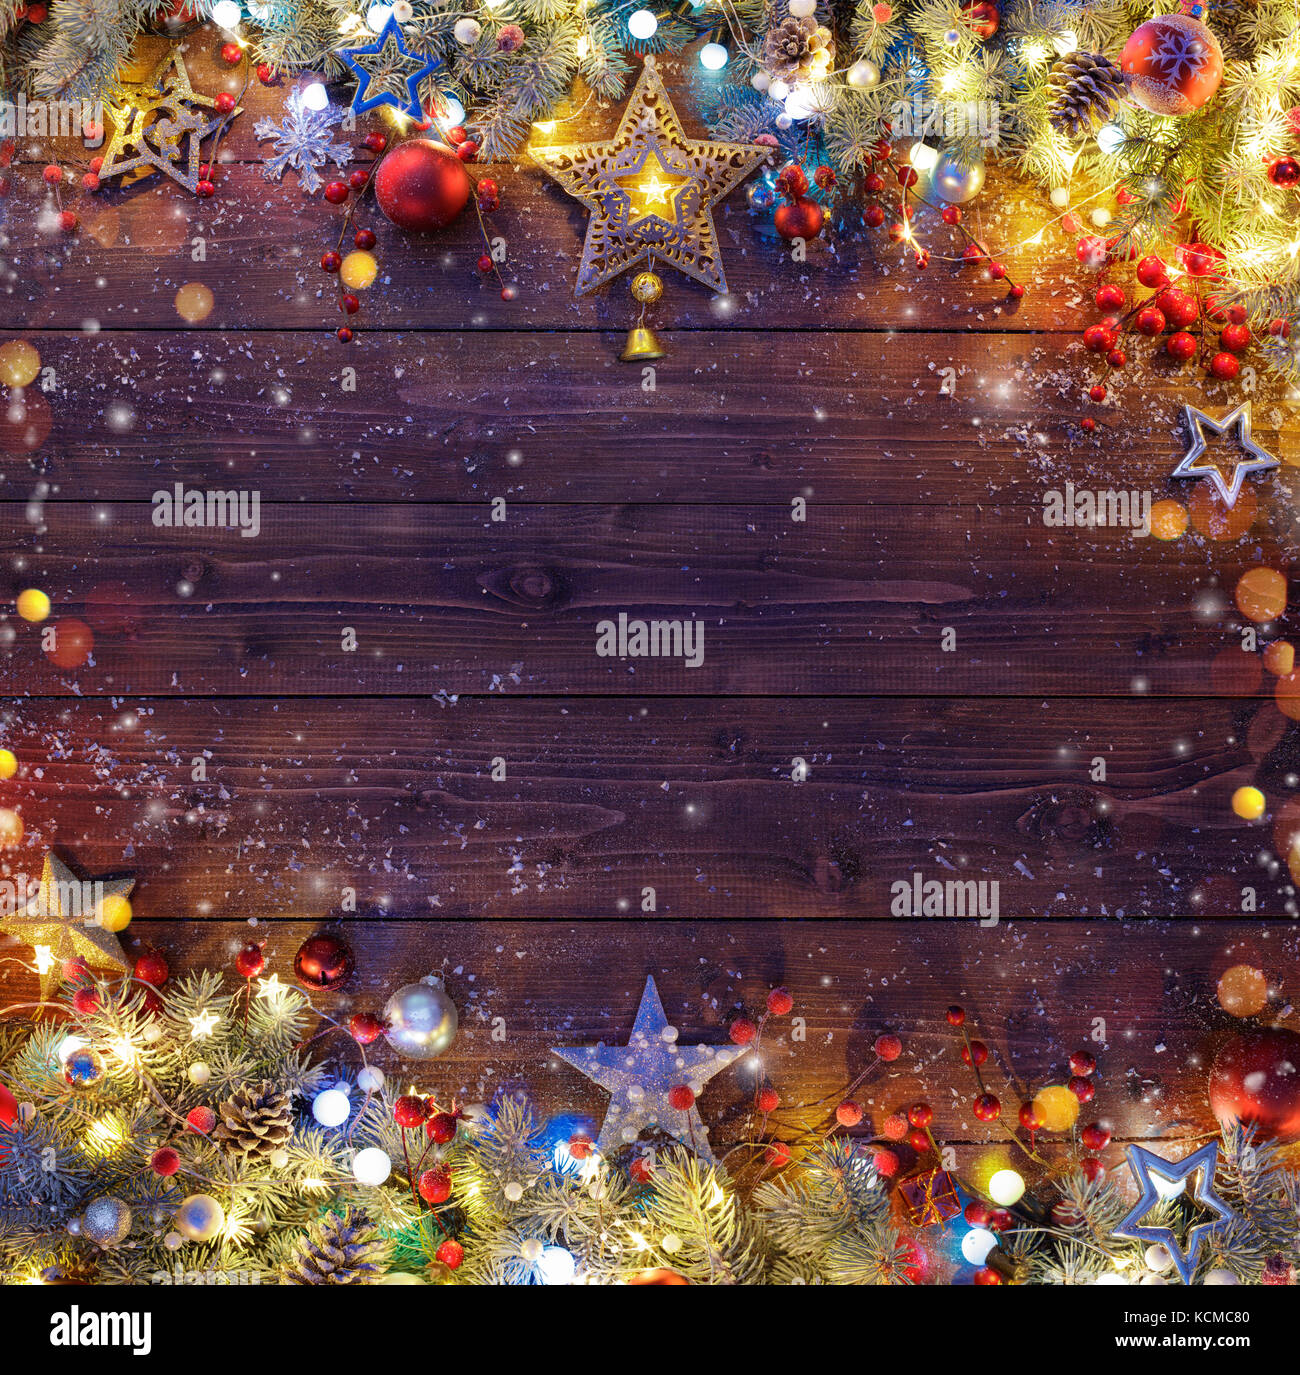 Christmas Background - Snowy Fir Branches And Lights On Dark Table ...